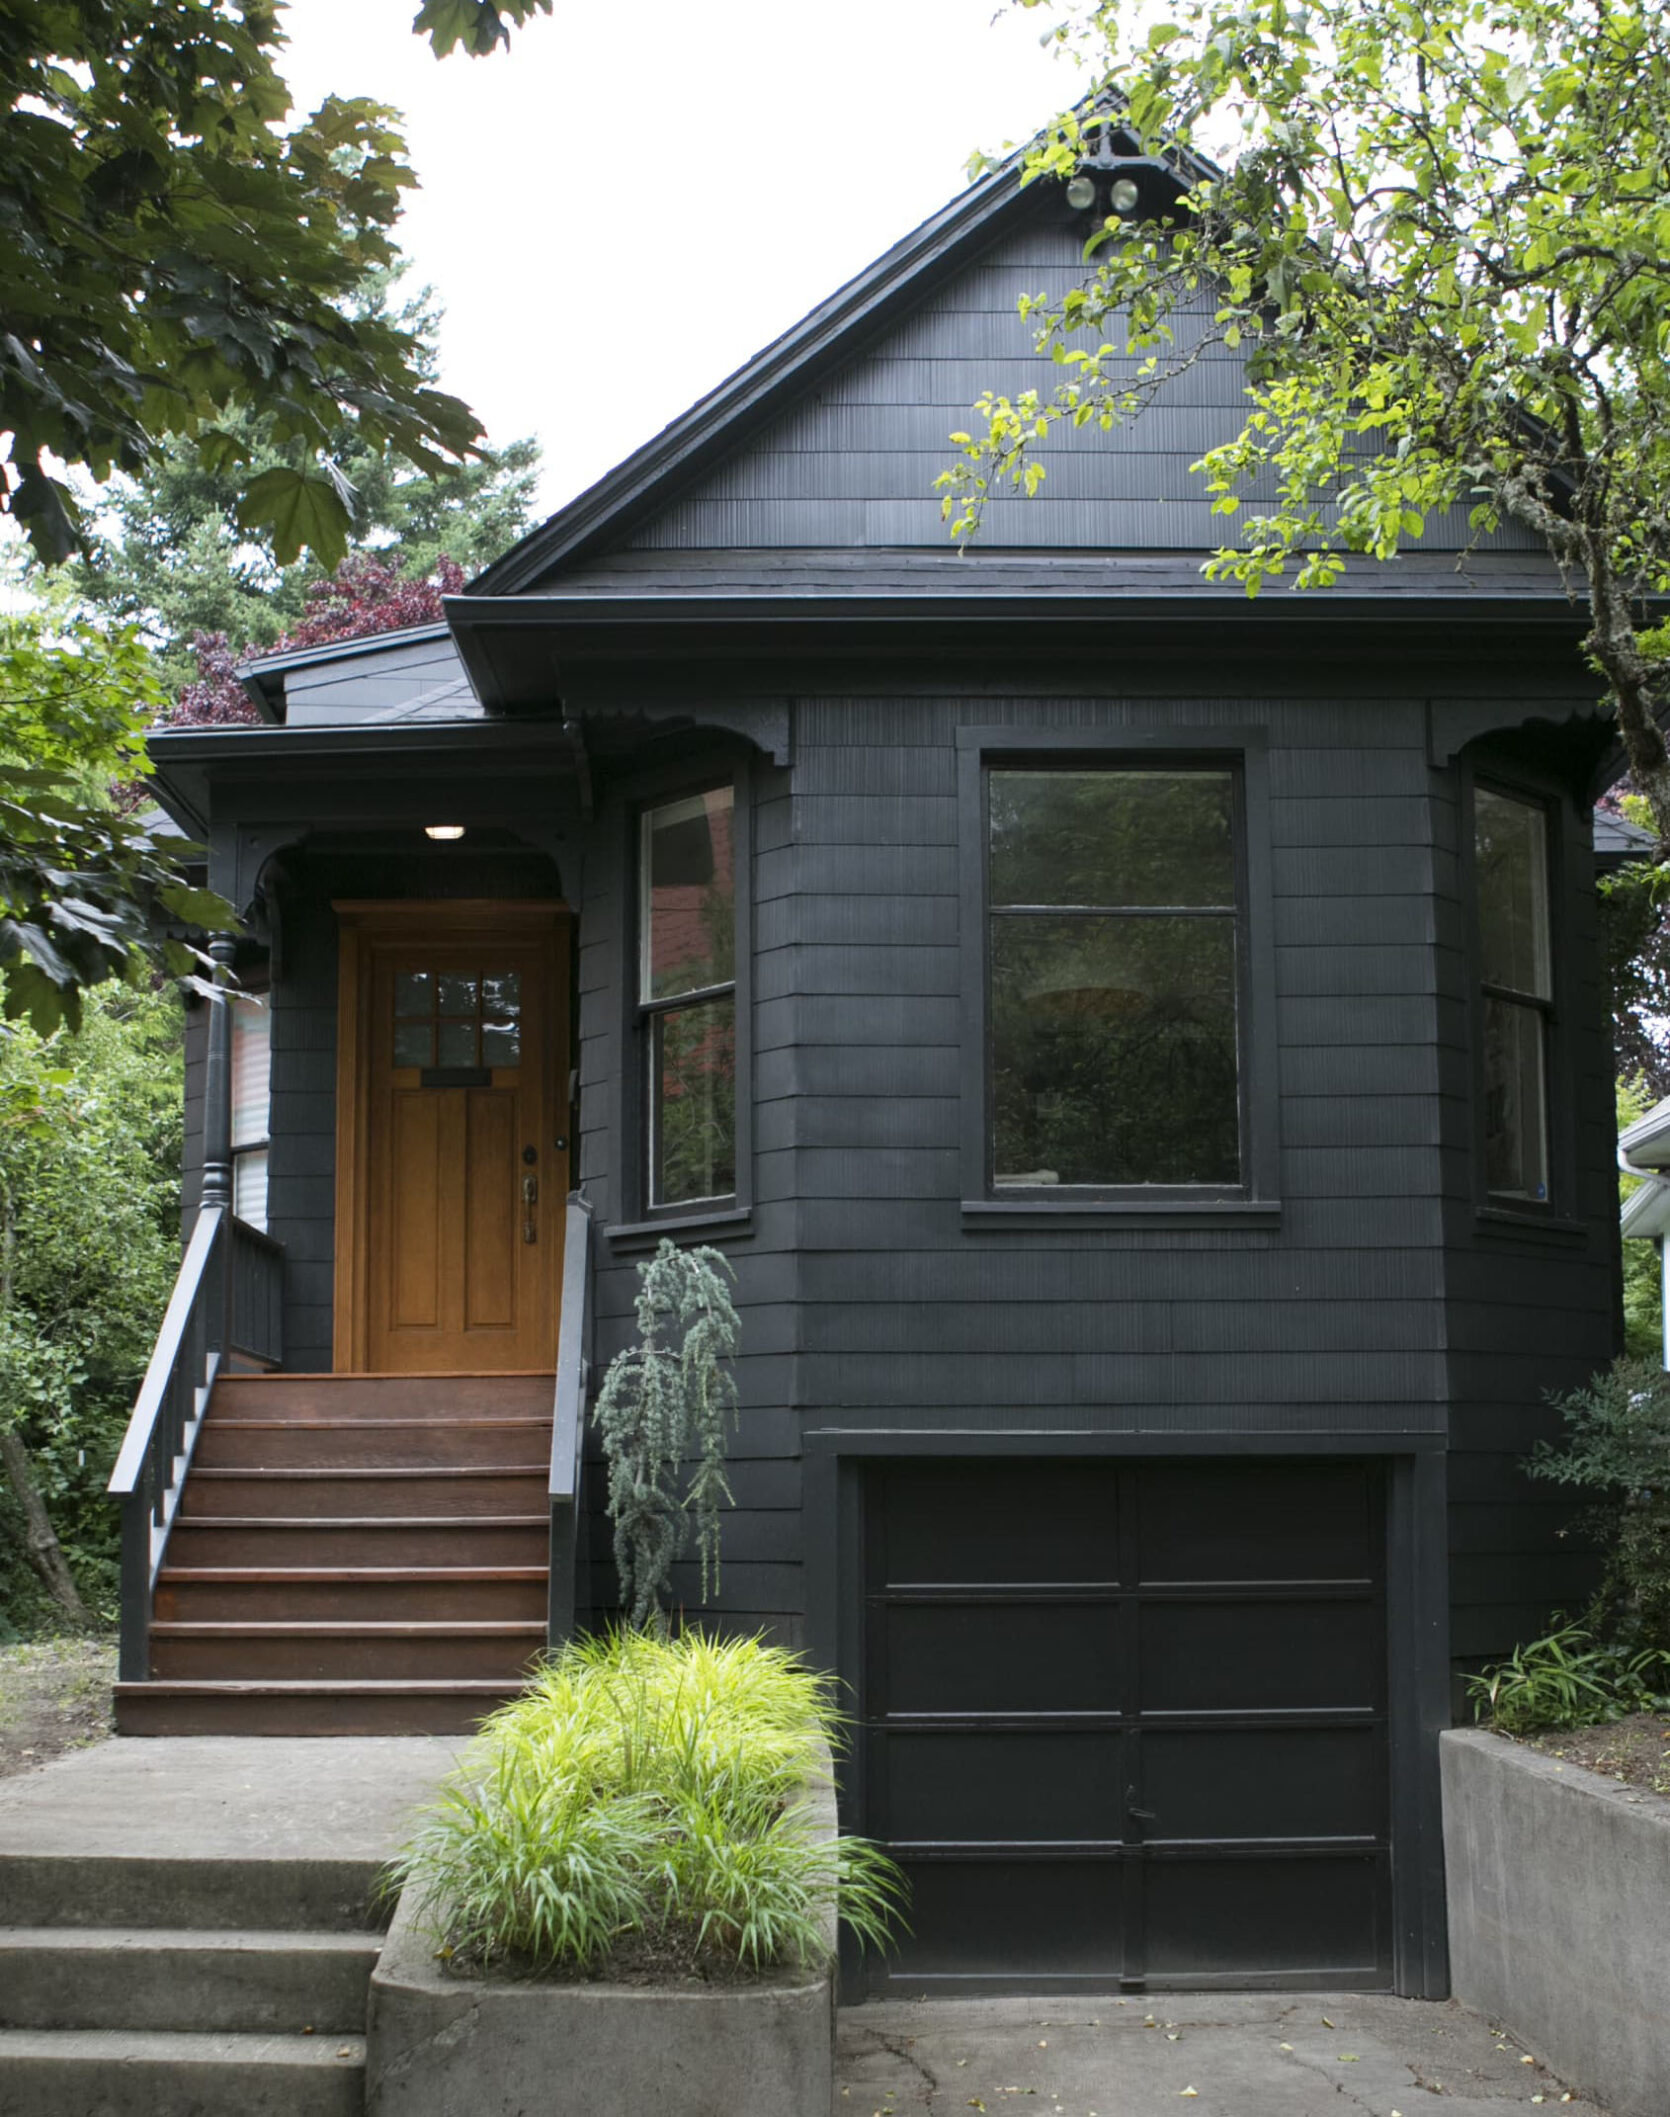 How To Choose An Exterior Paint Color + Our Favorite Shades And Combos